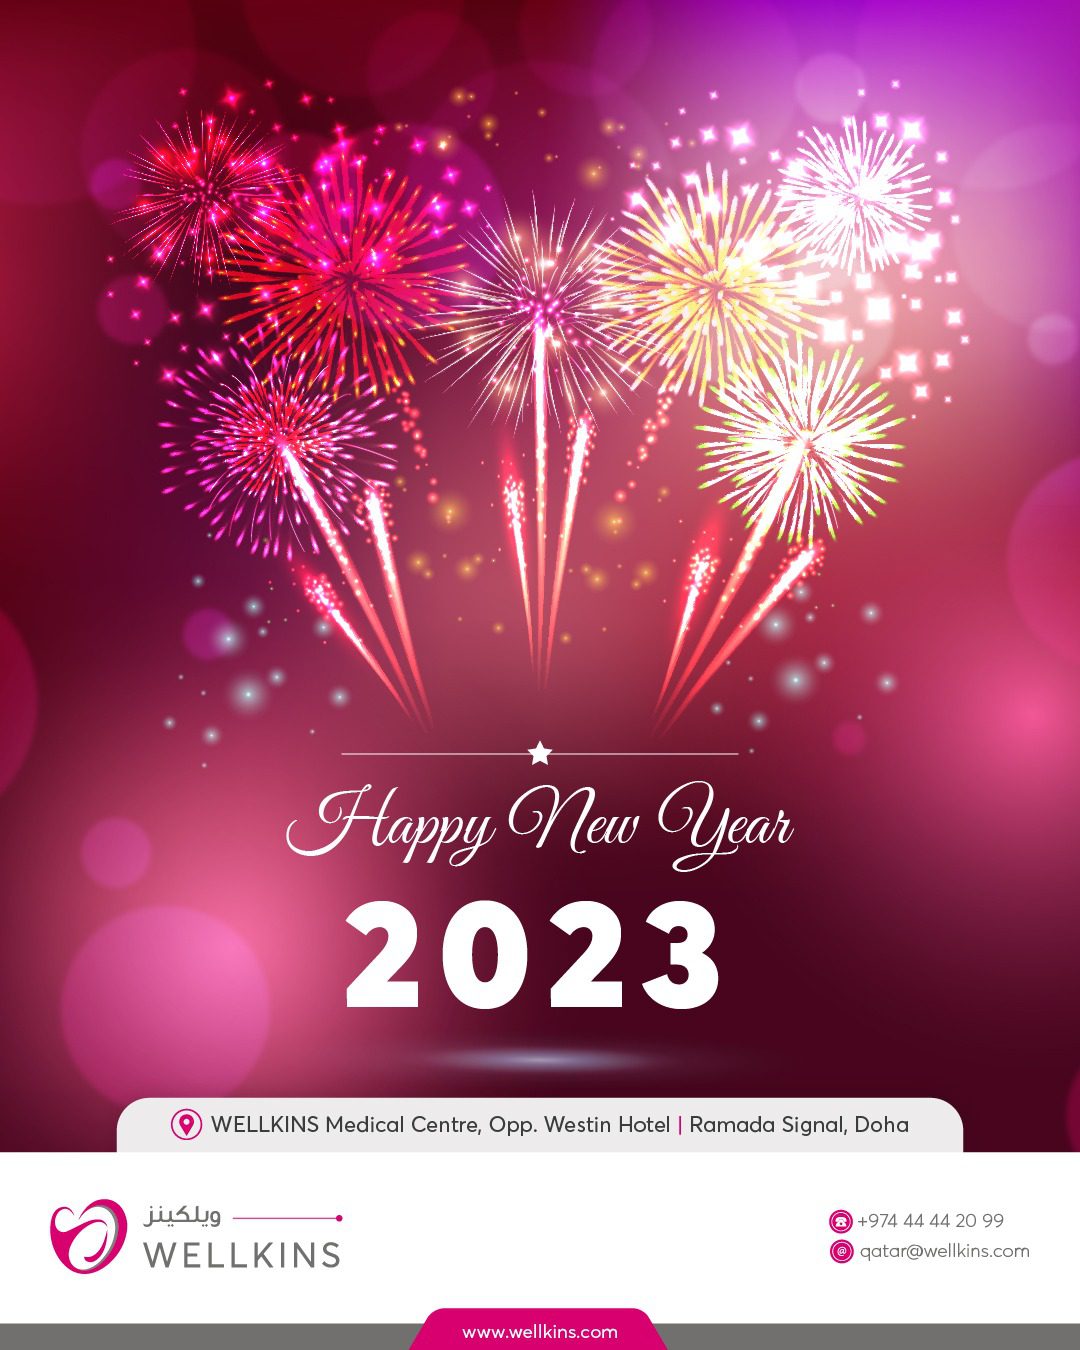 WELLKINS wishes you a Happy New Year._______________________________
To learn more about #WELLKINSQATAR and our services, kindly visit our website www.wellkins.com
Helpline: 4444 2099
_______________________________
#Wellkinsqatar #wellkins #medicalcentre #Qatar2022